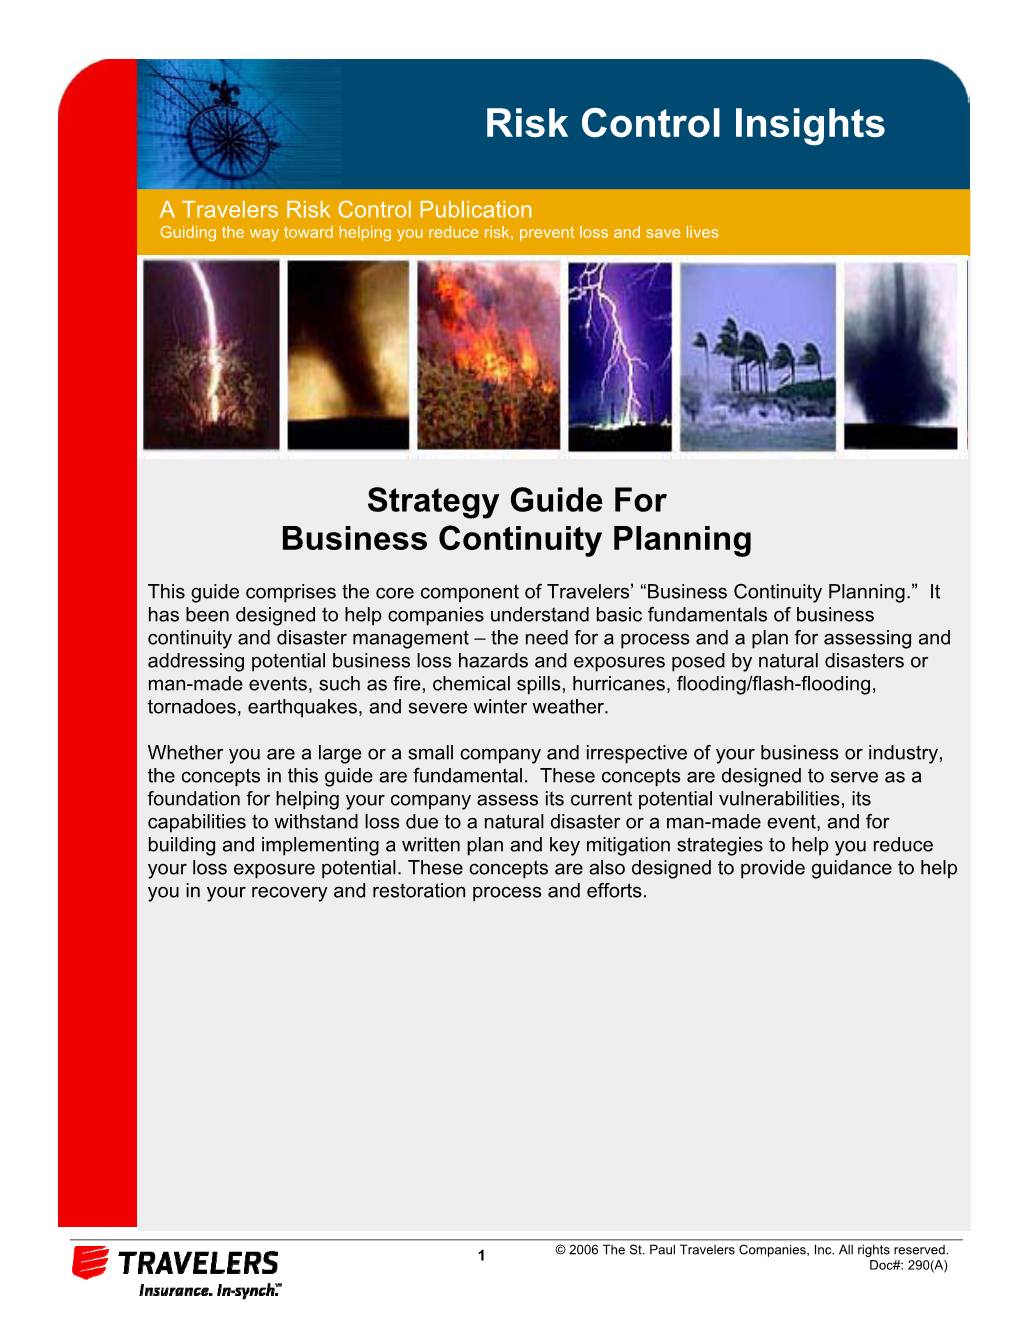 Strategy Guide for Business Continuity Planning